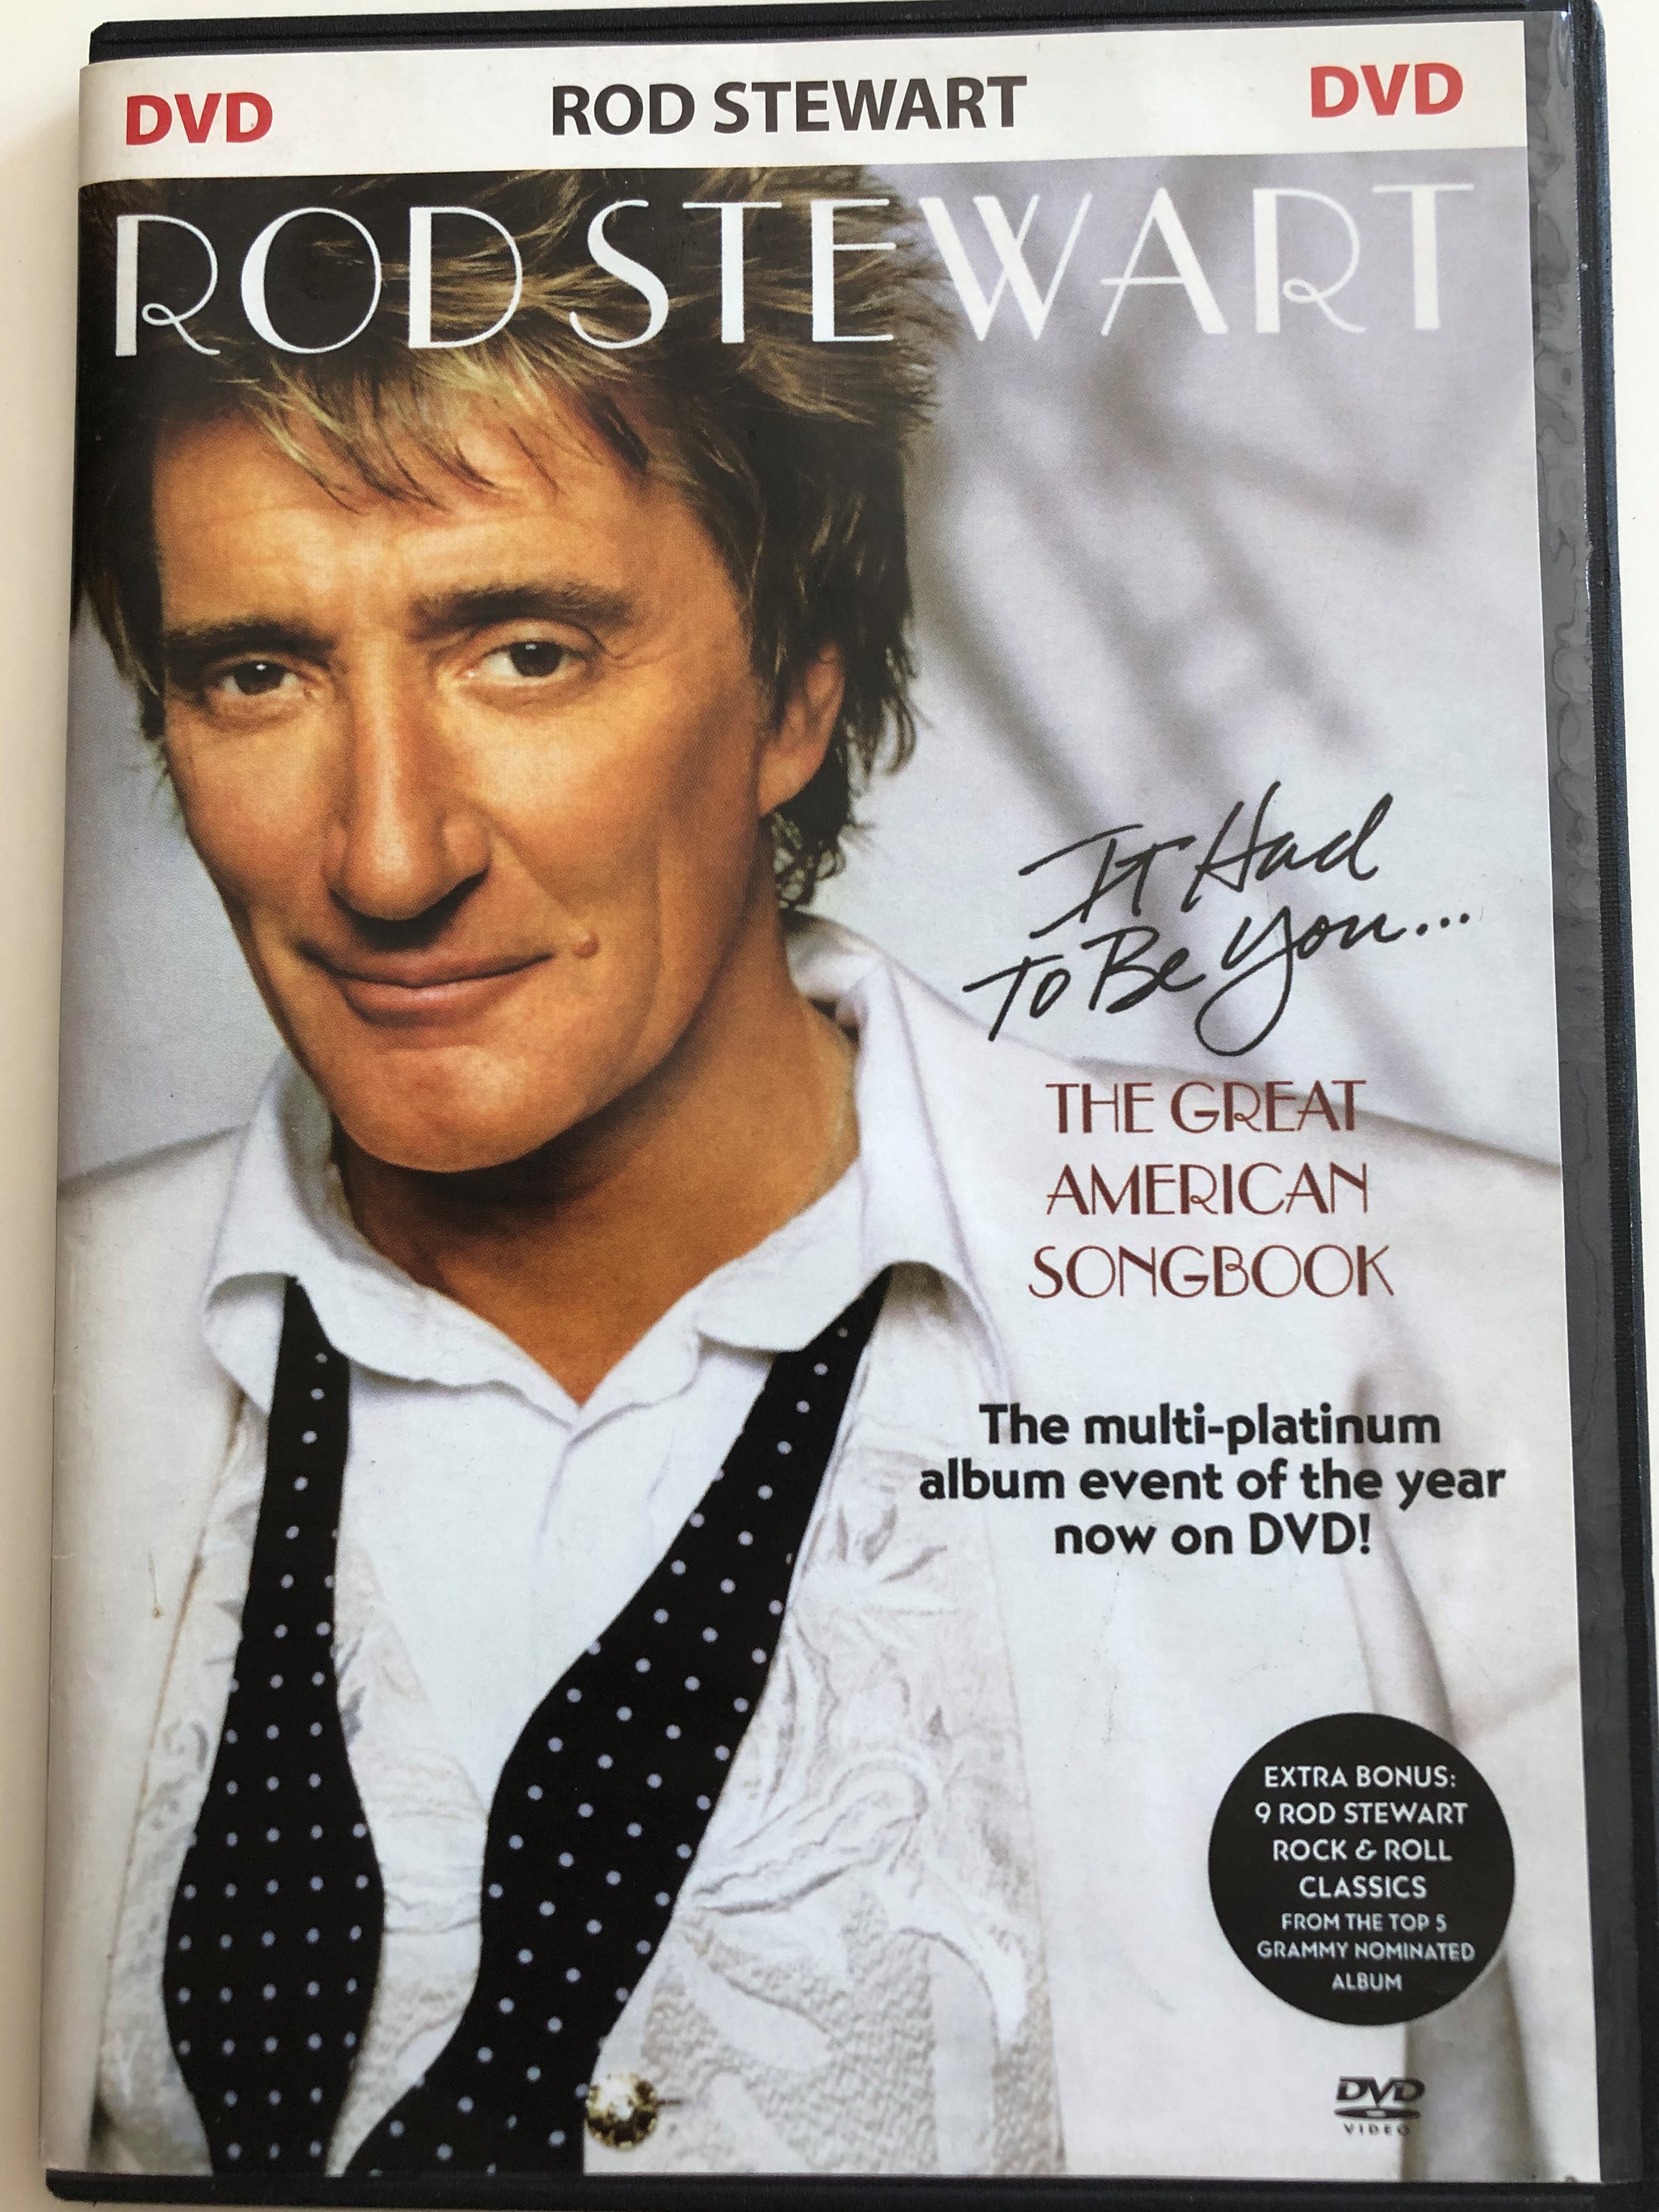 rod-stewart-dvd-2003-it-had-to-be-you...-the-great-american-songbook-the-multi-platinum-album-event-of-the-year-now-on-dvd-1-.jpg